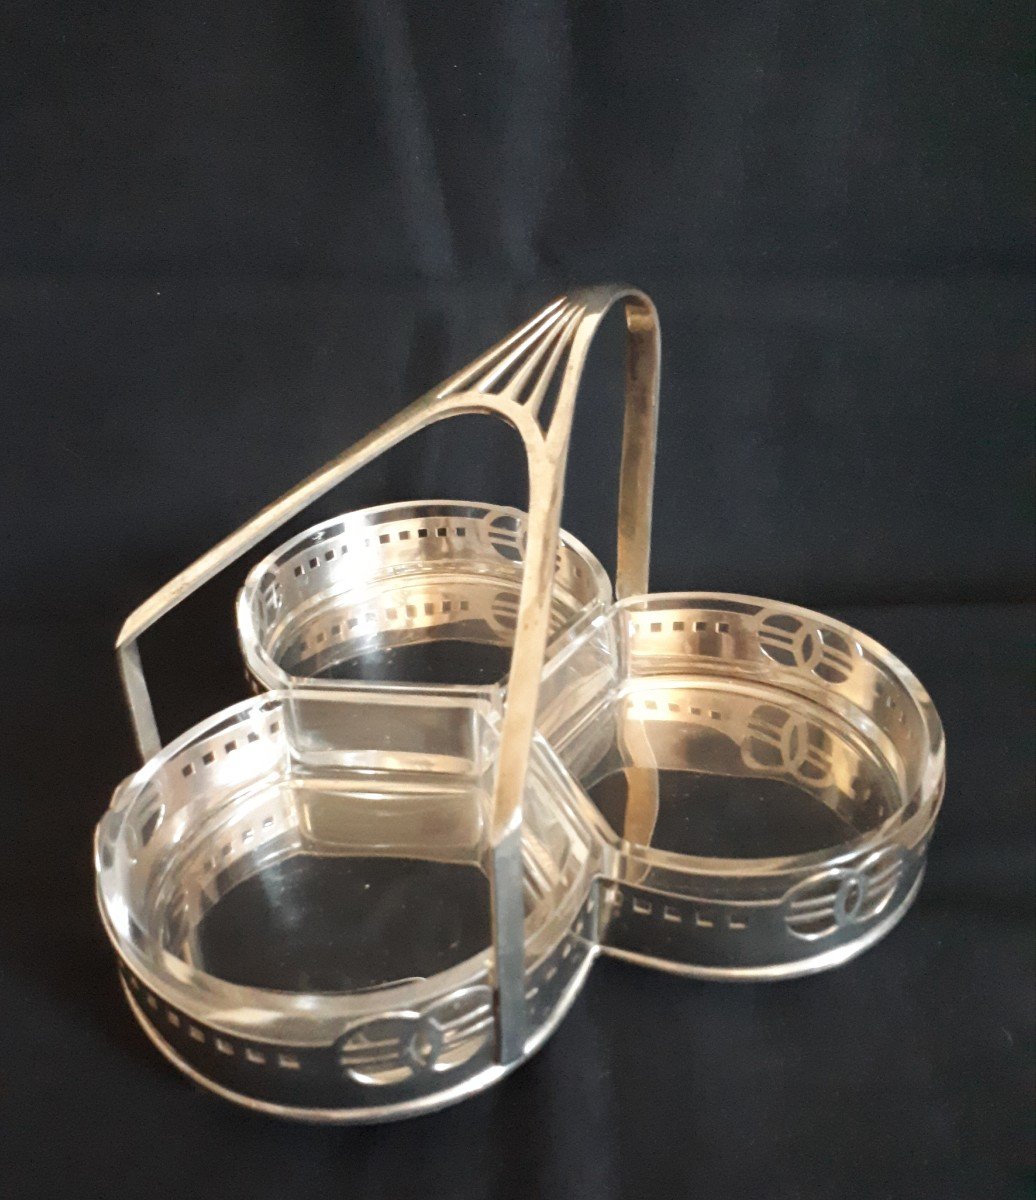 Wmf Hors d'Oeuvres Dish In Silver Plated Metal And Glass 1910-photo-4